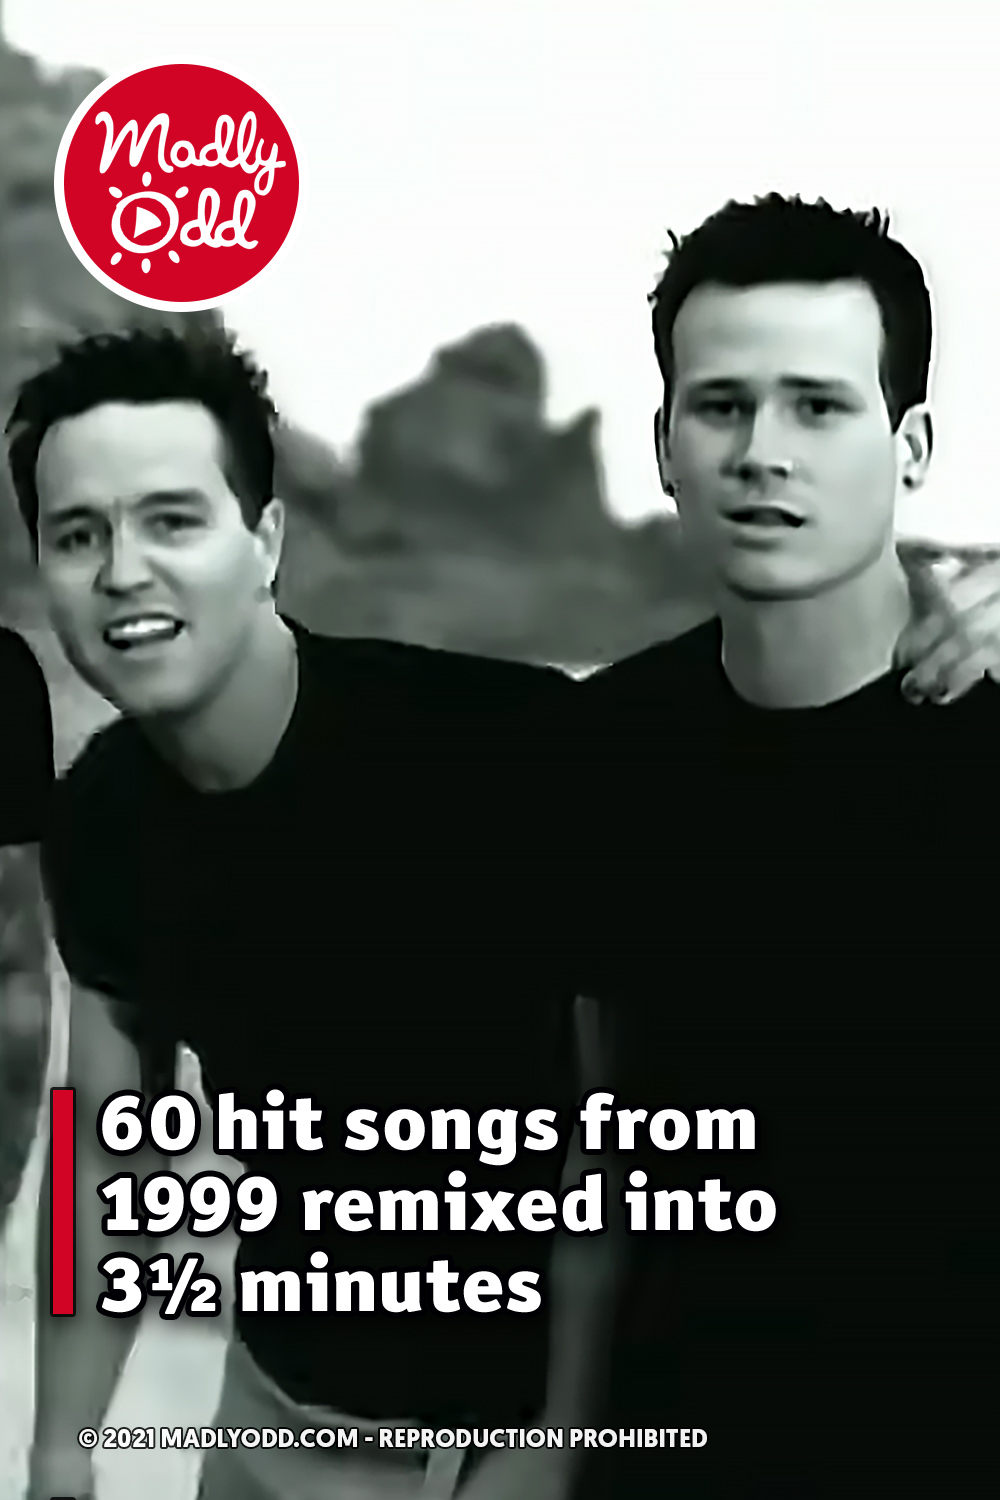 60 hit songs from 1999 remixed into 3½ minutes